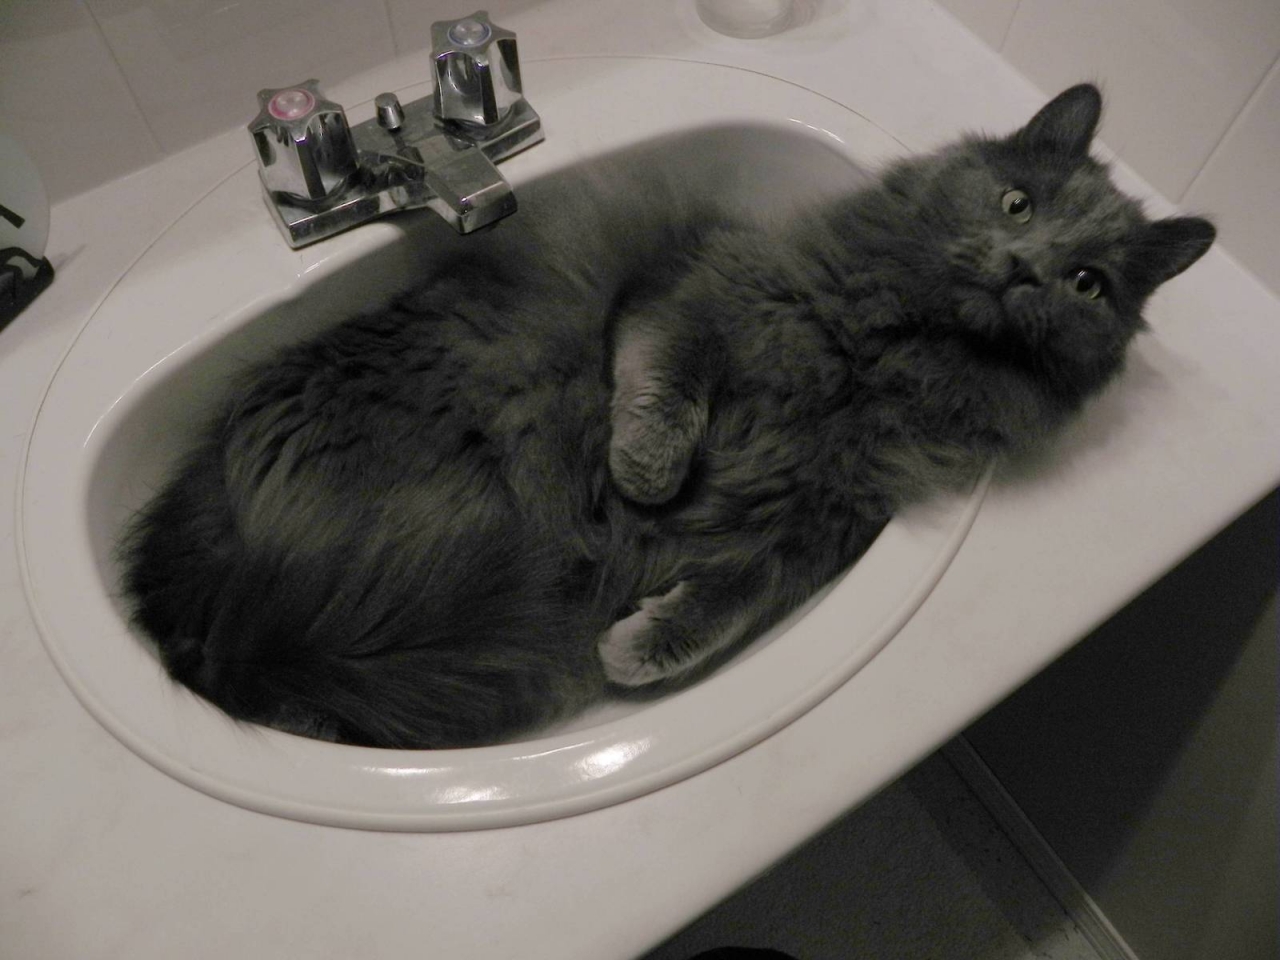 Nebelung Cat in Sink for 1280 x 960 resolution